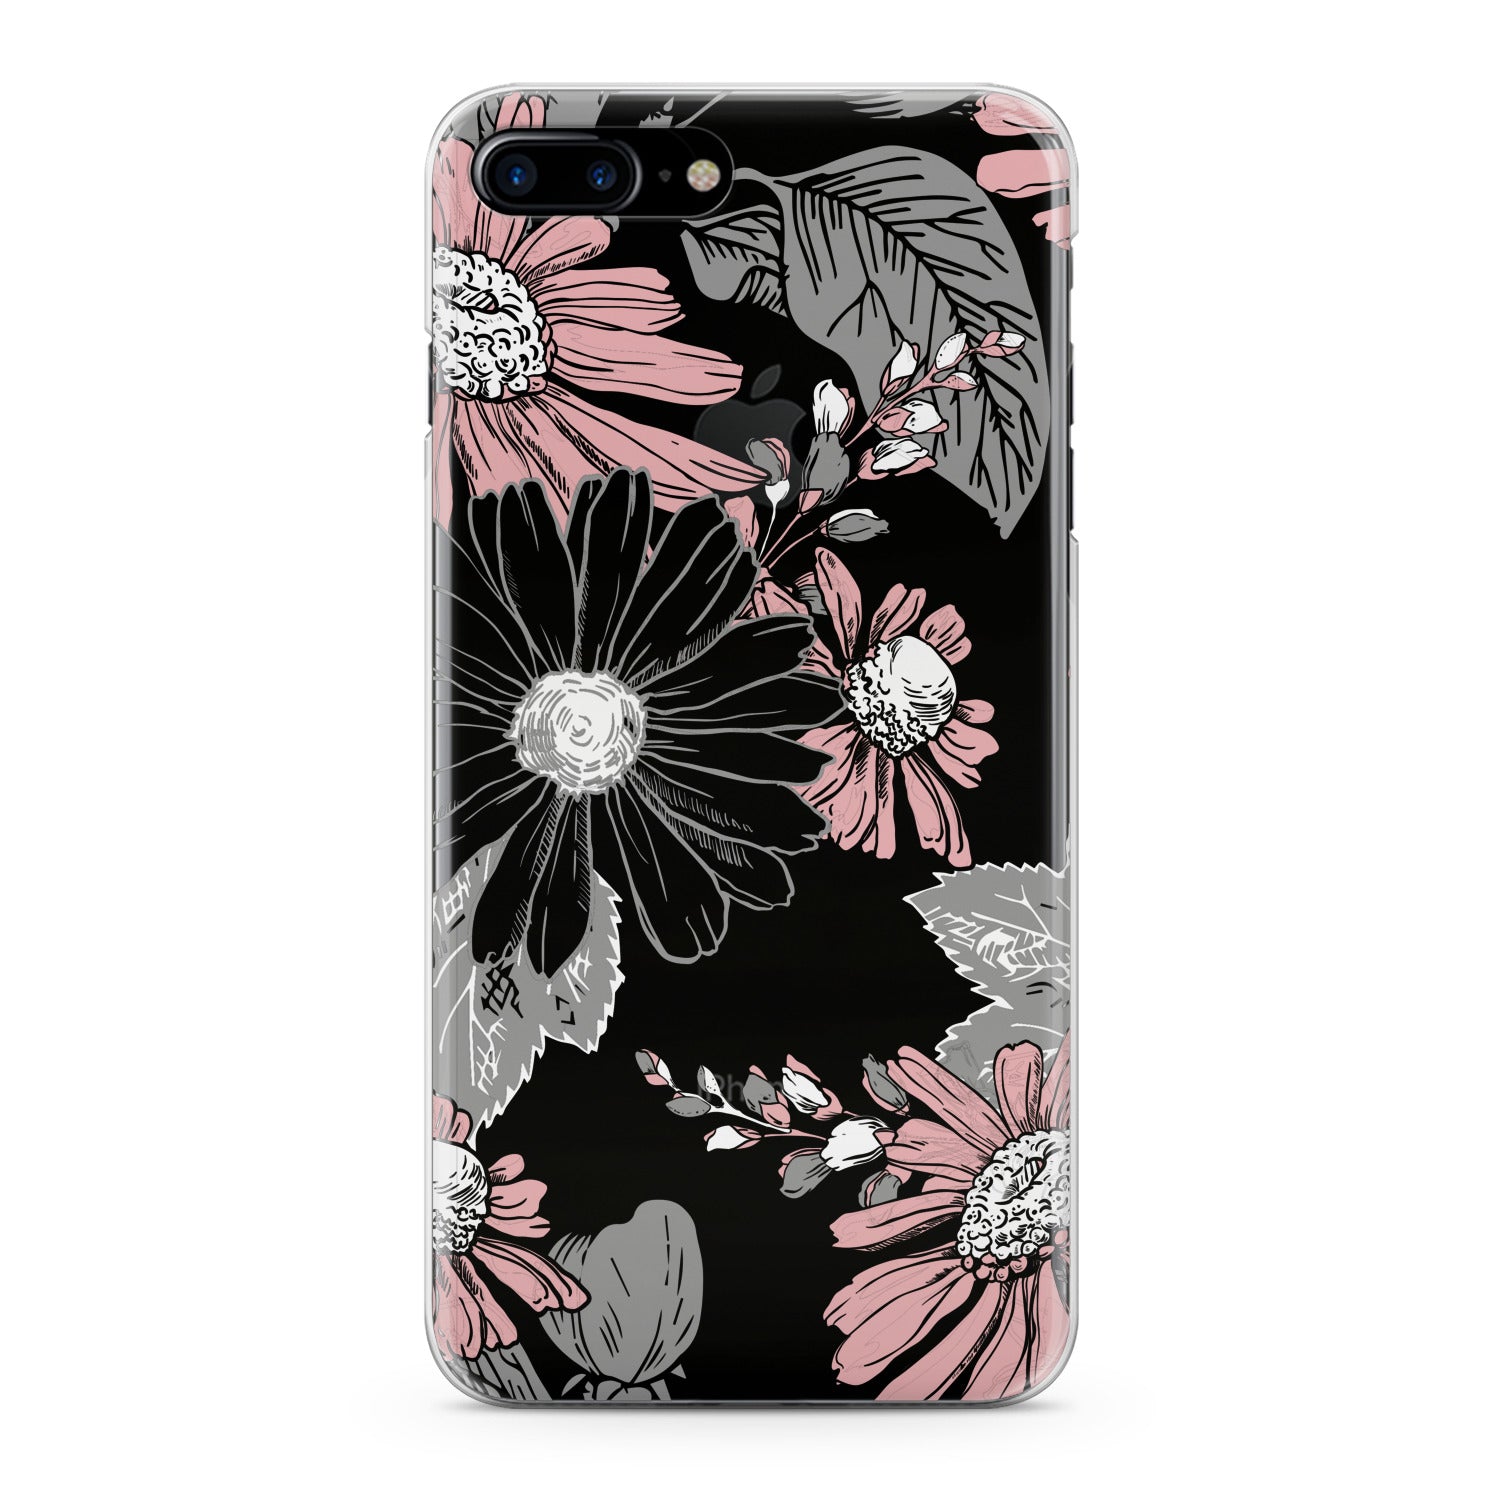 Lex Altern Floral Printed Pattern Phone Case for your iPhone & Android phone.